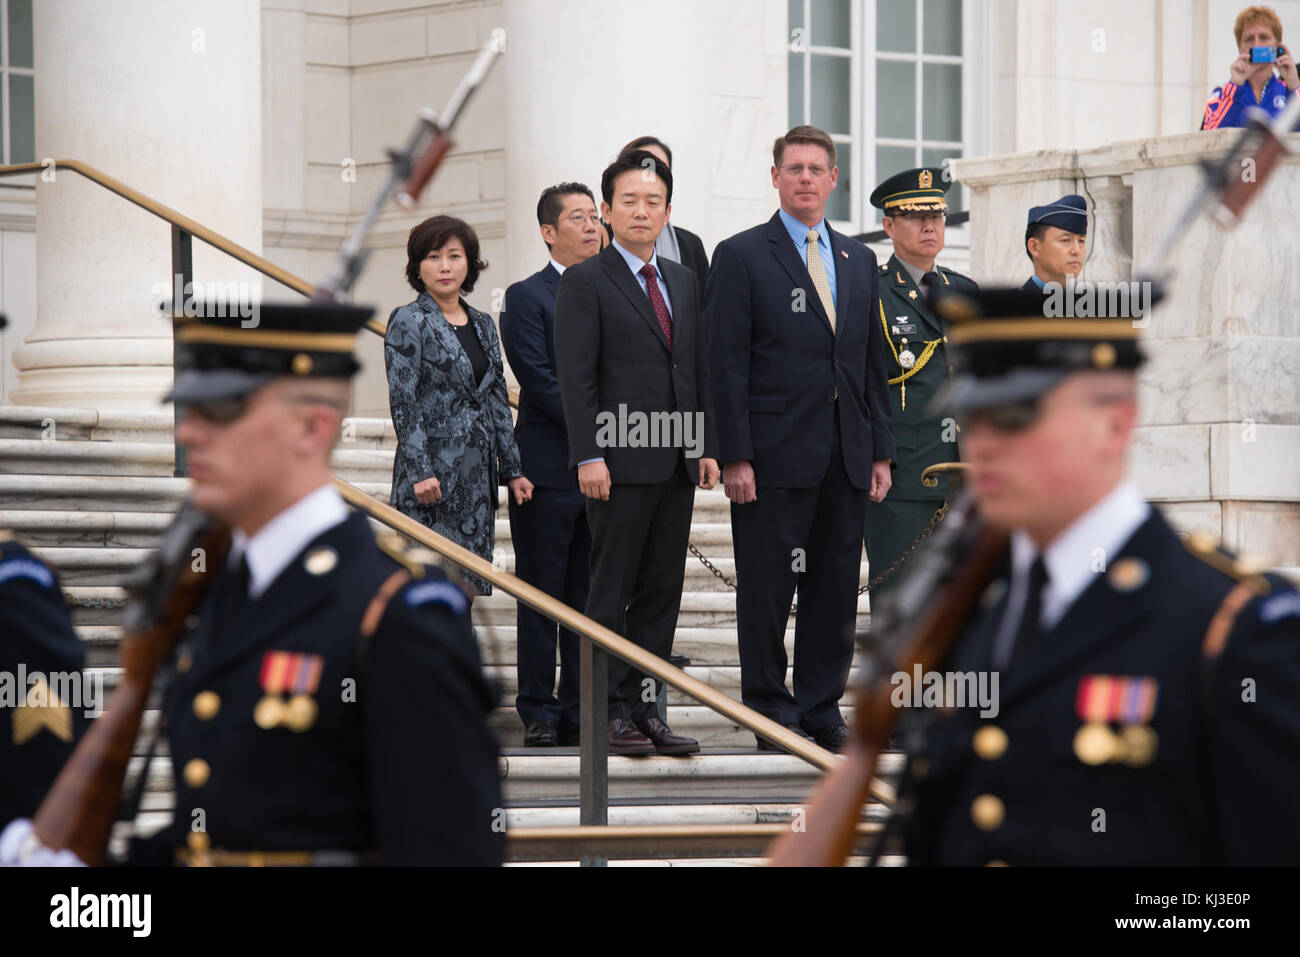 Gyeonggi Province Governor laid a wreath at the Tomb of the Unknown Soldier in Arlington National Cemetery (22520759995) Stock Photo